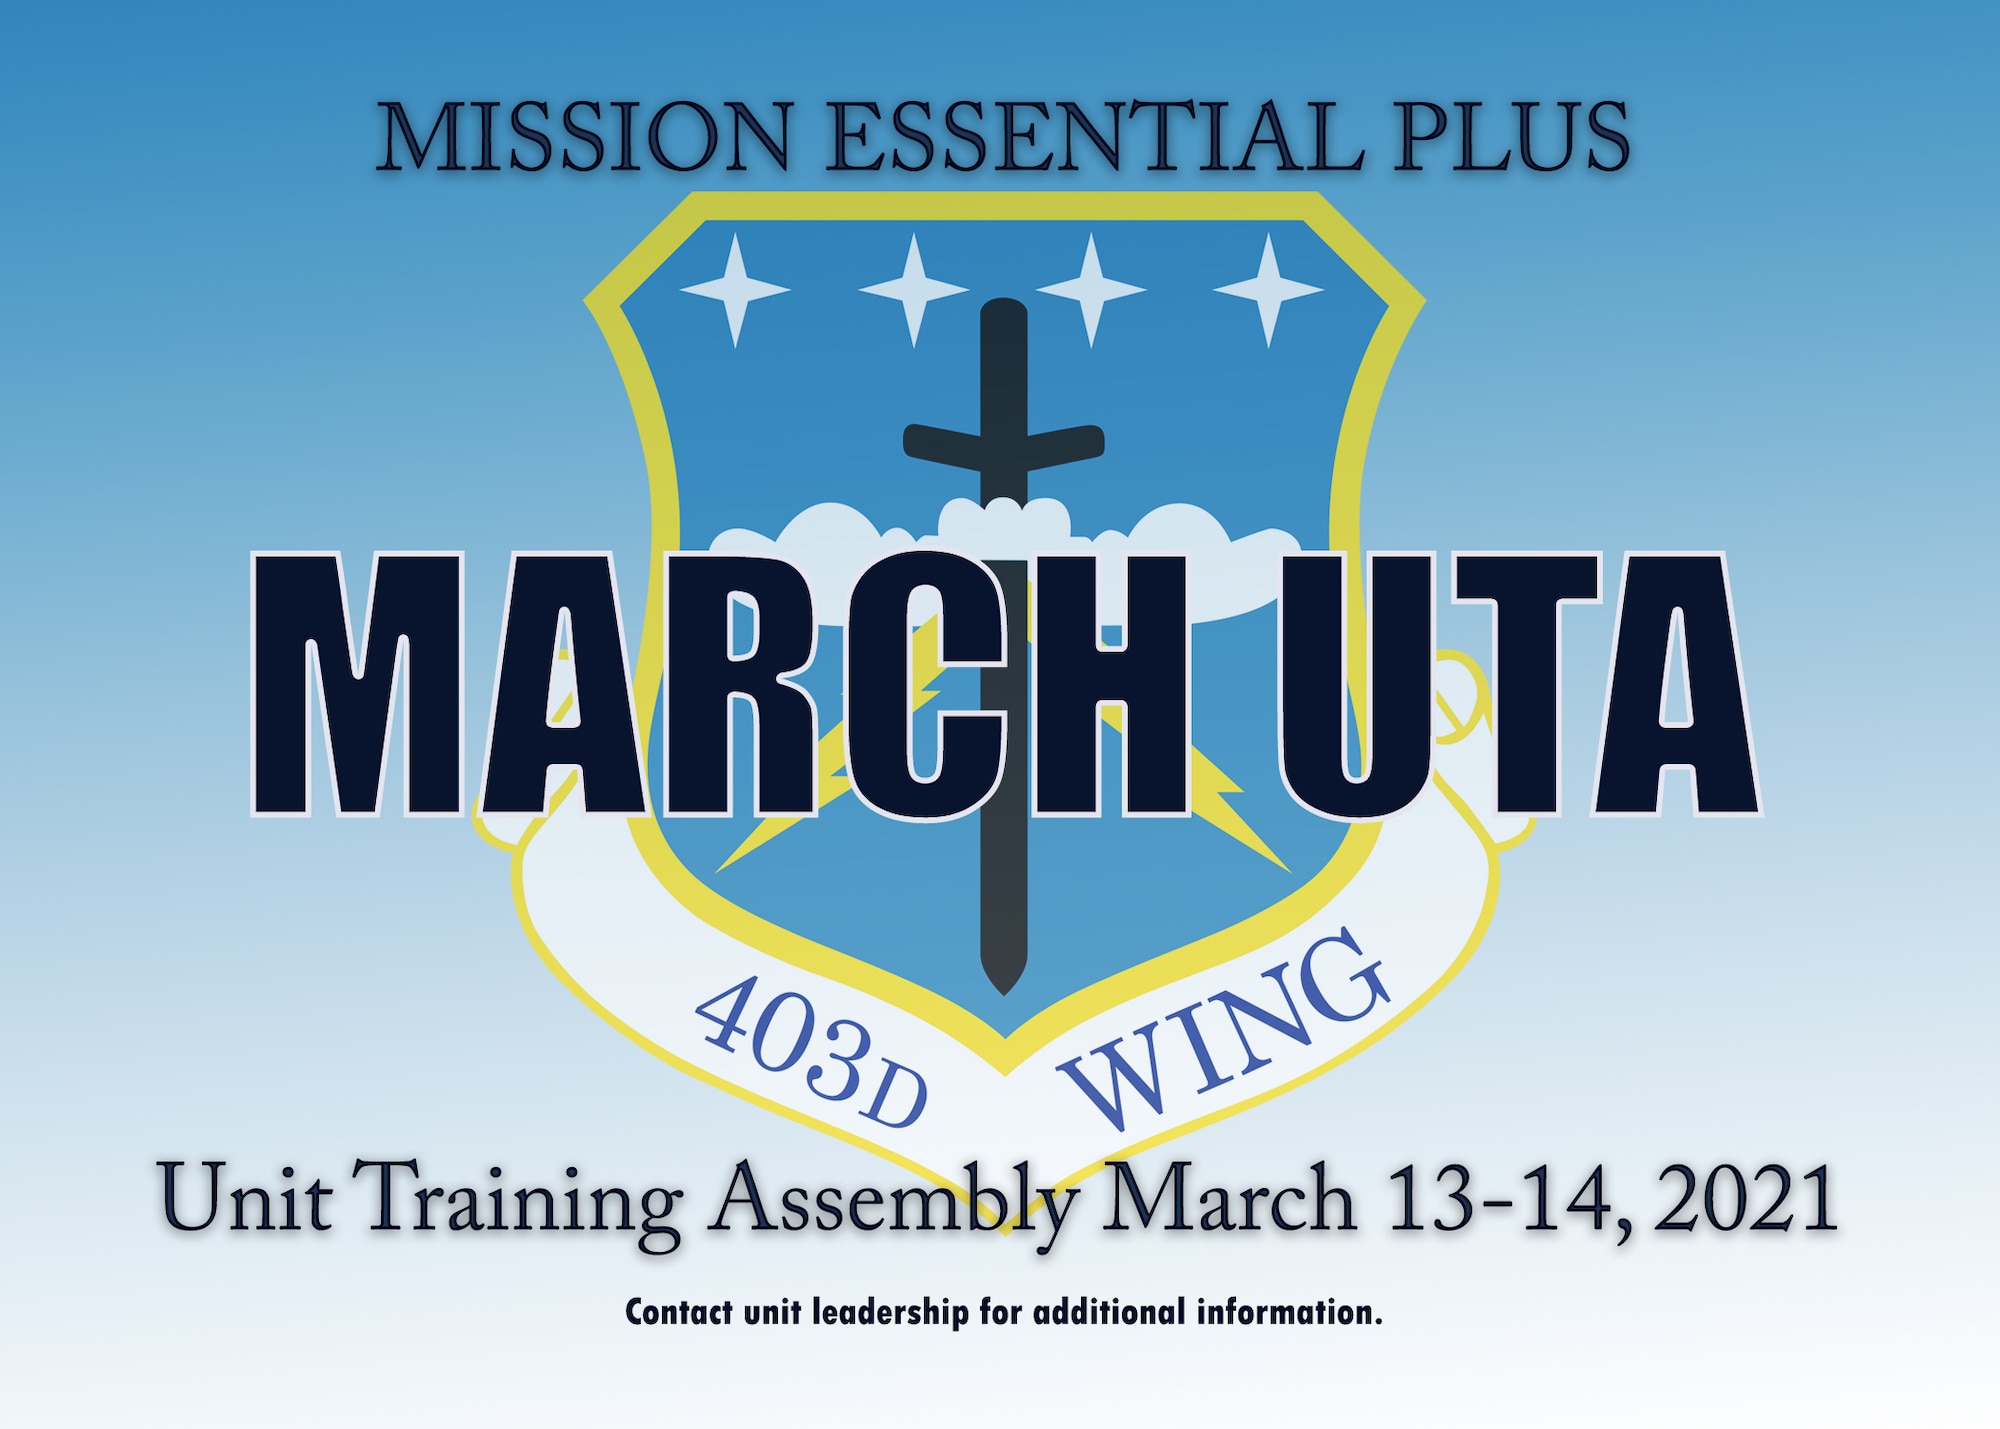 The 403rd Wing March 13-14 Unit Training Assembly has been designated as mission essential plus at Keesler Air Force Base, Mississippi. Airmen should contact their unit leadership for more information. (U.S. Air Force graphic/Lt. Col. Marnee A.C. Losurdo)